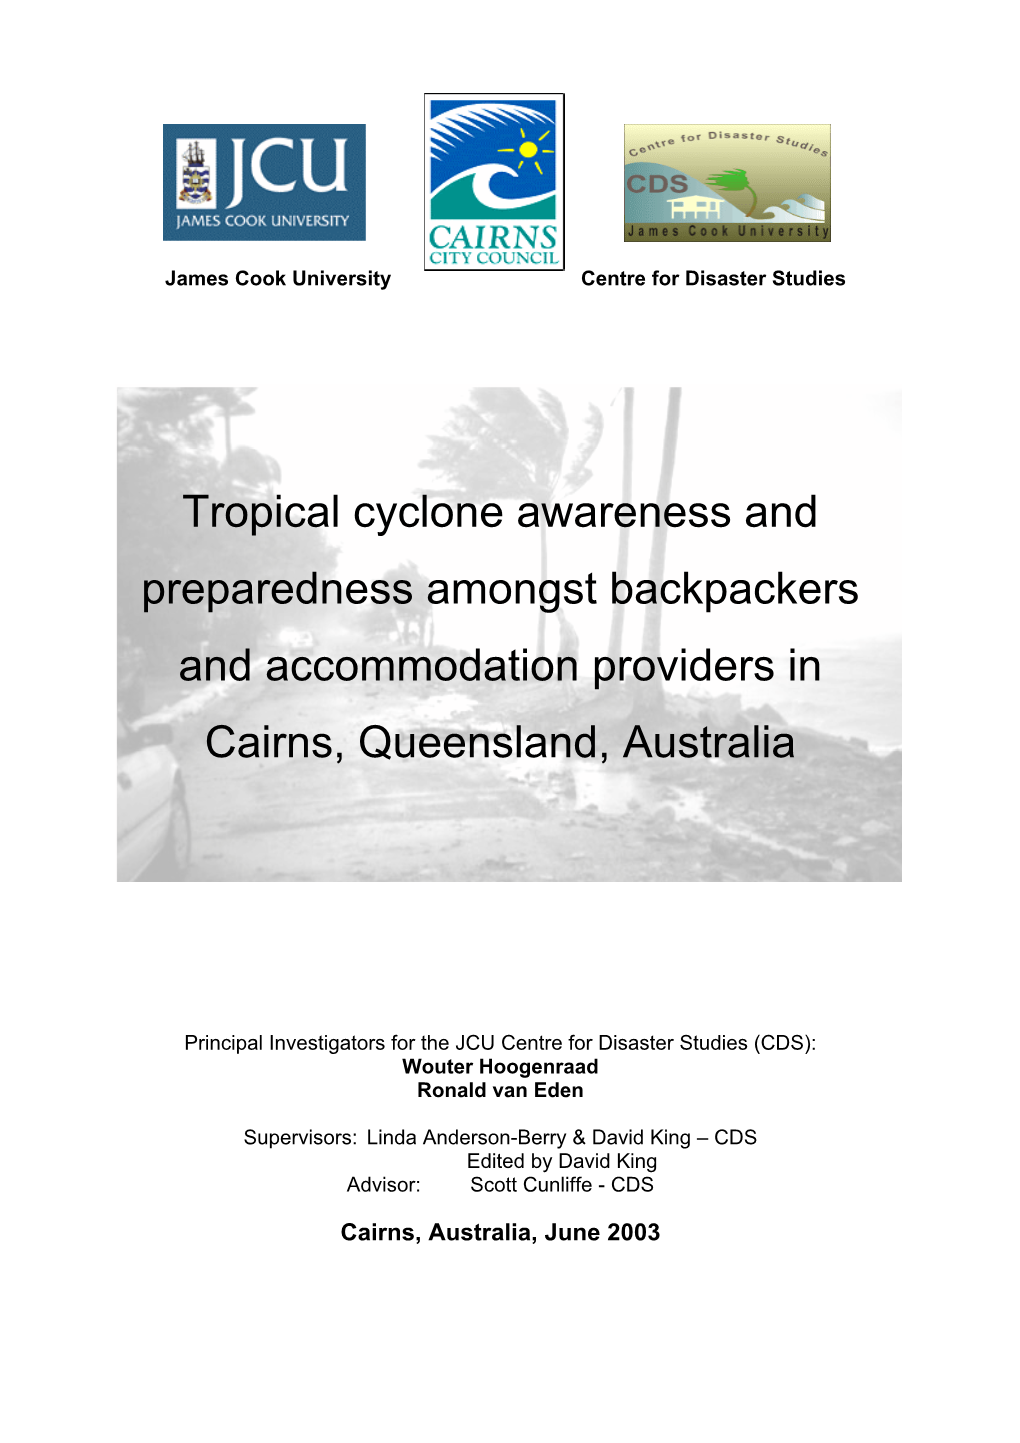 Tropical Cyclone Awareness and Preparedness Amongst Backpackers and Accommodation Providers in Cairns, Queensland, Australia